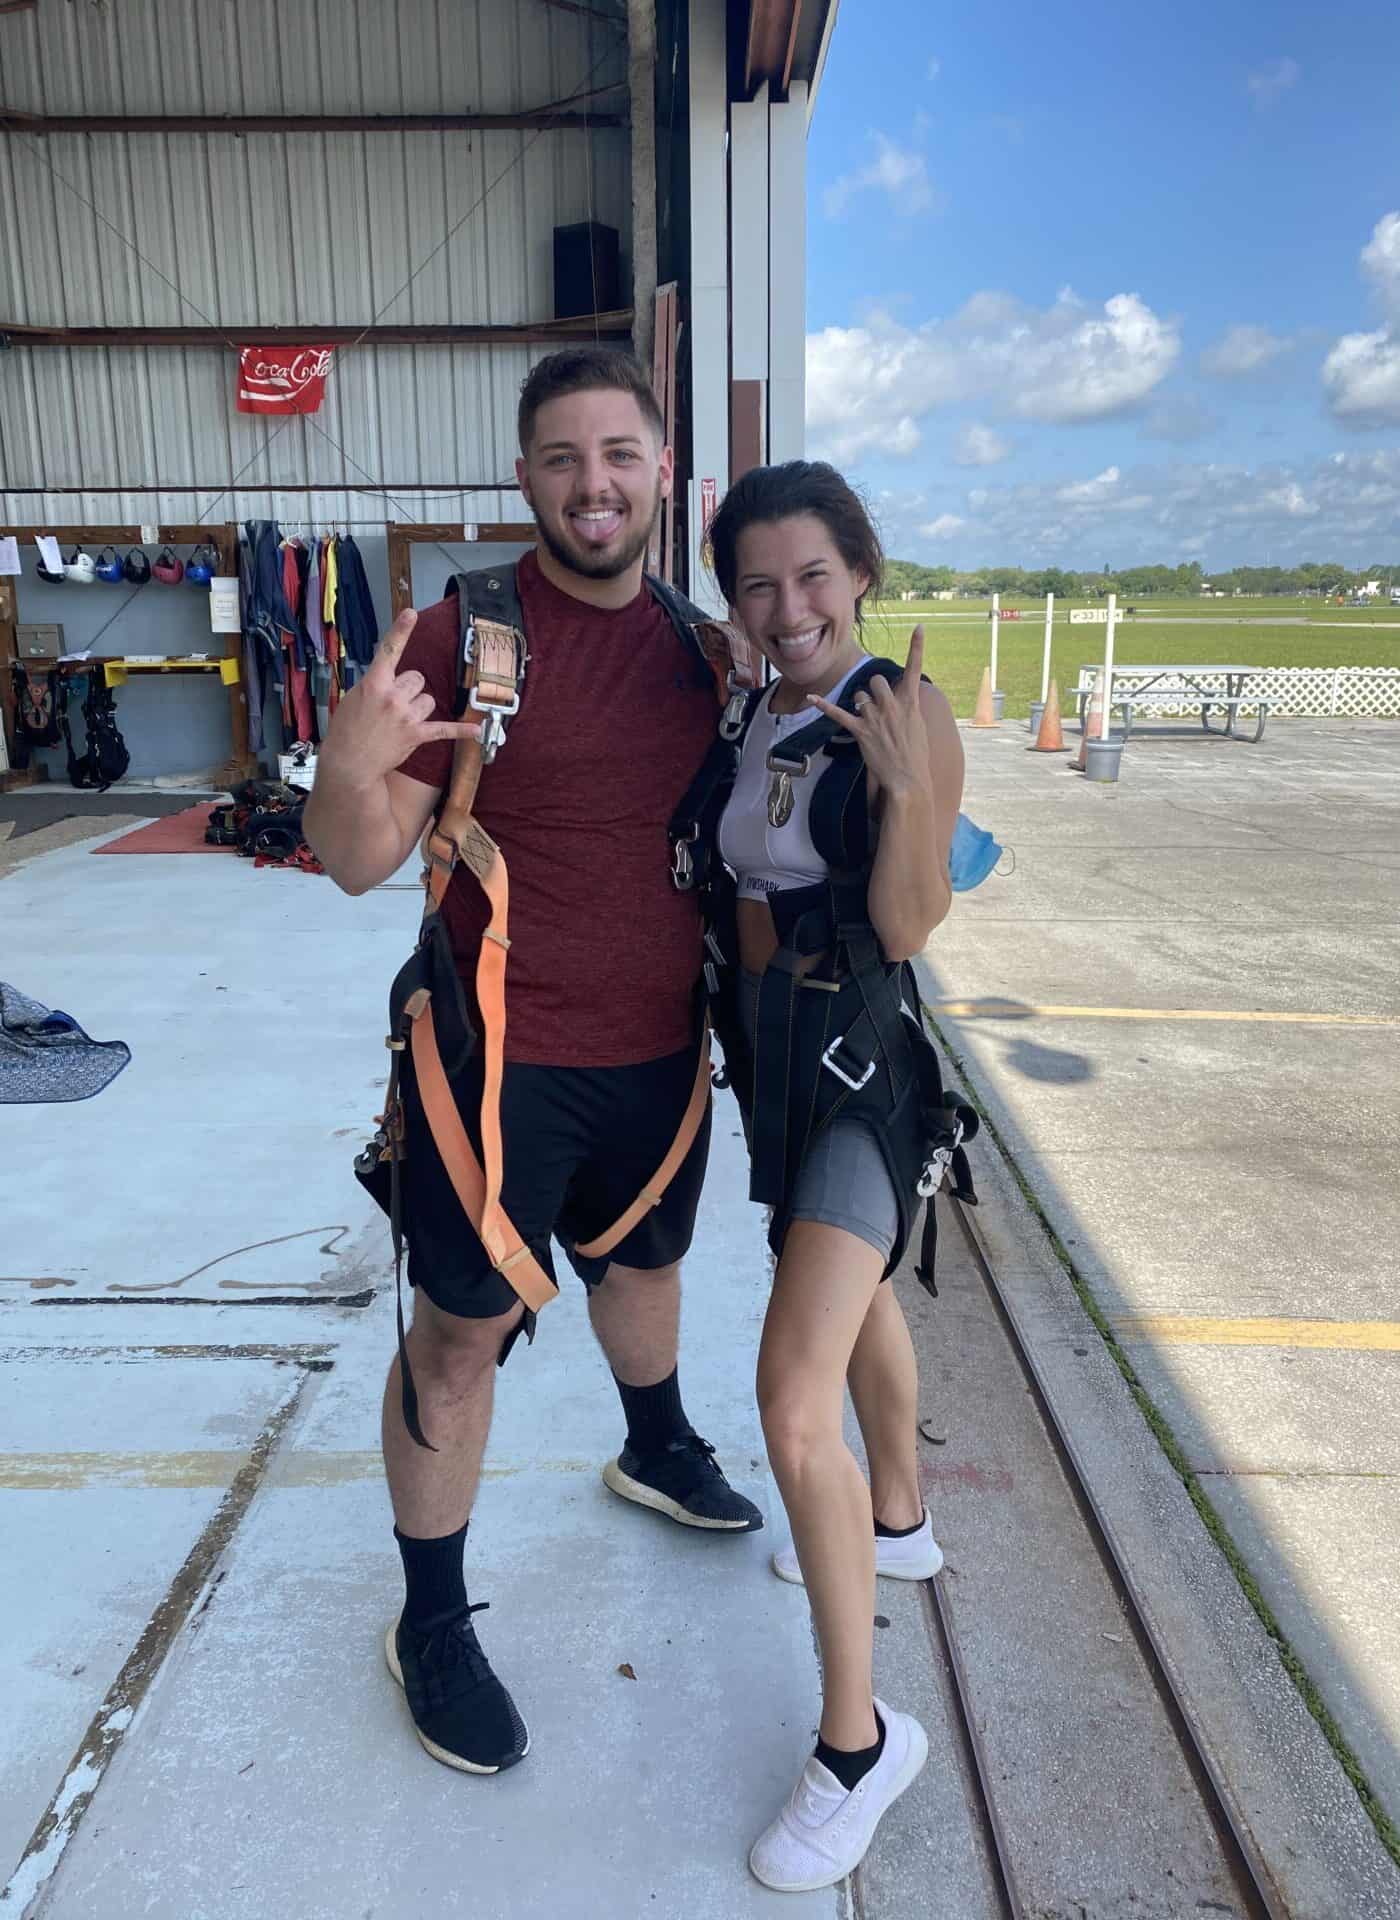 man and woman smiling in skydiving gear after jumping out of plane